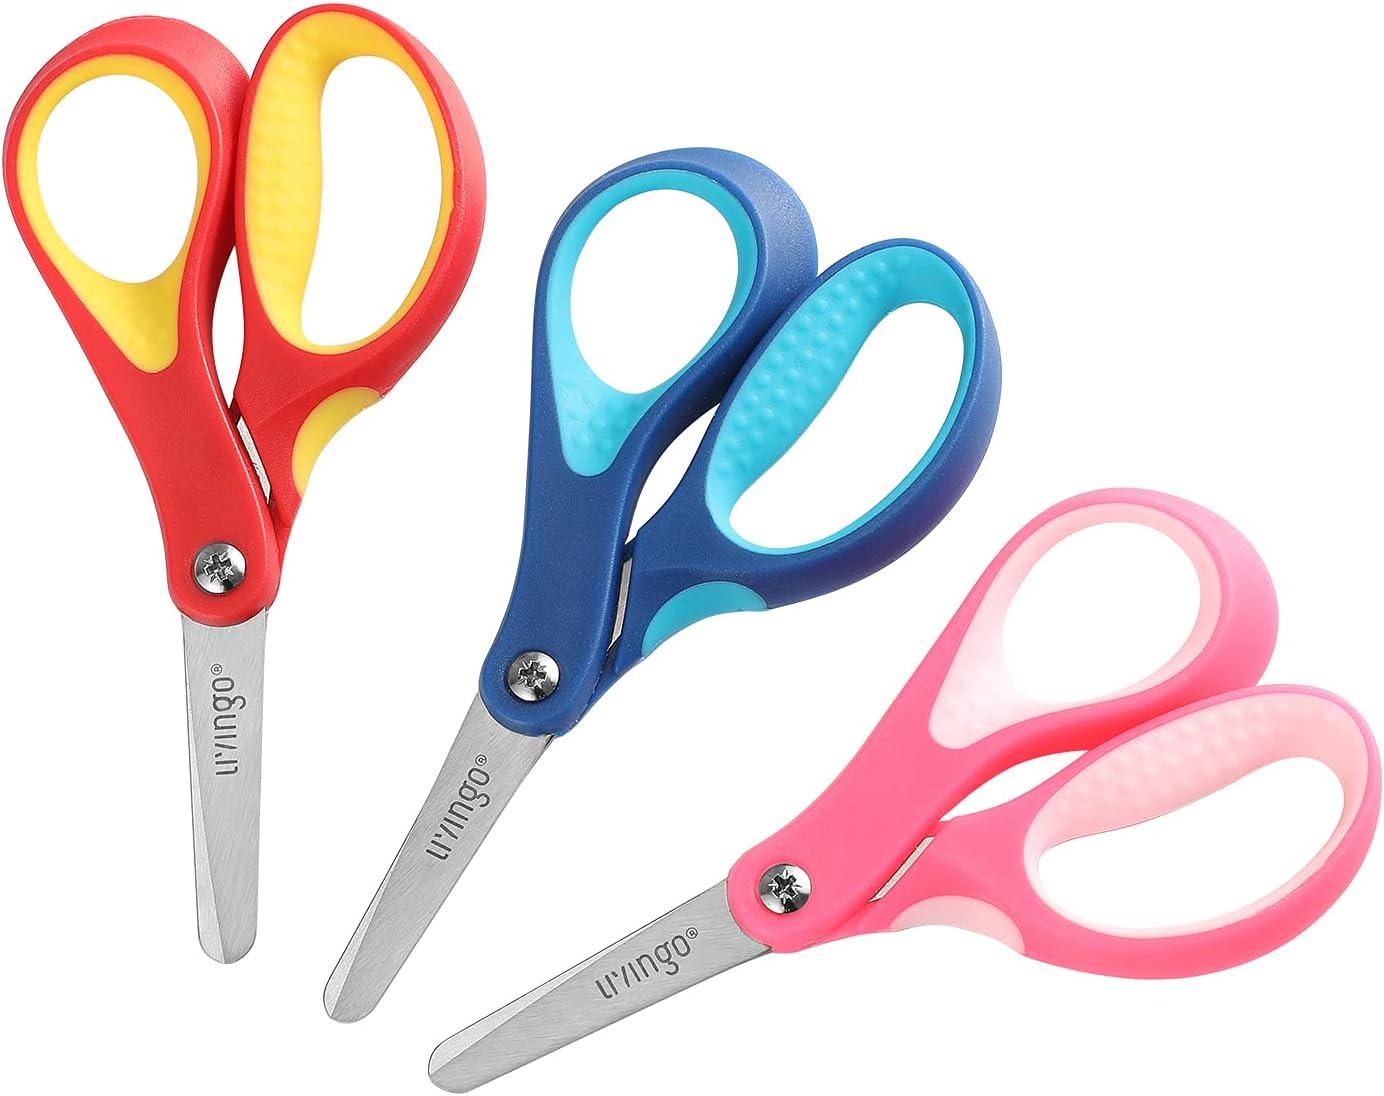 1 Piece Set of Professional Sewing Scissors Student Handmade Office  Scissors Kids Safety Small Scissors Paper Cutting